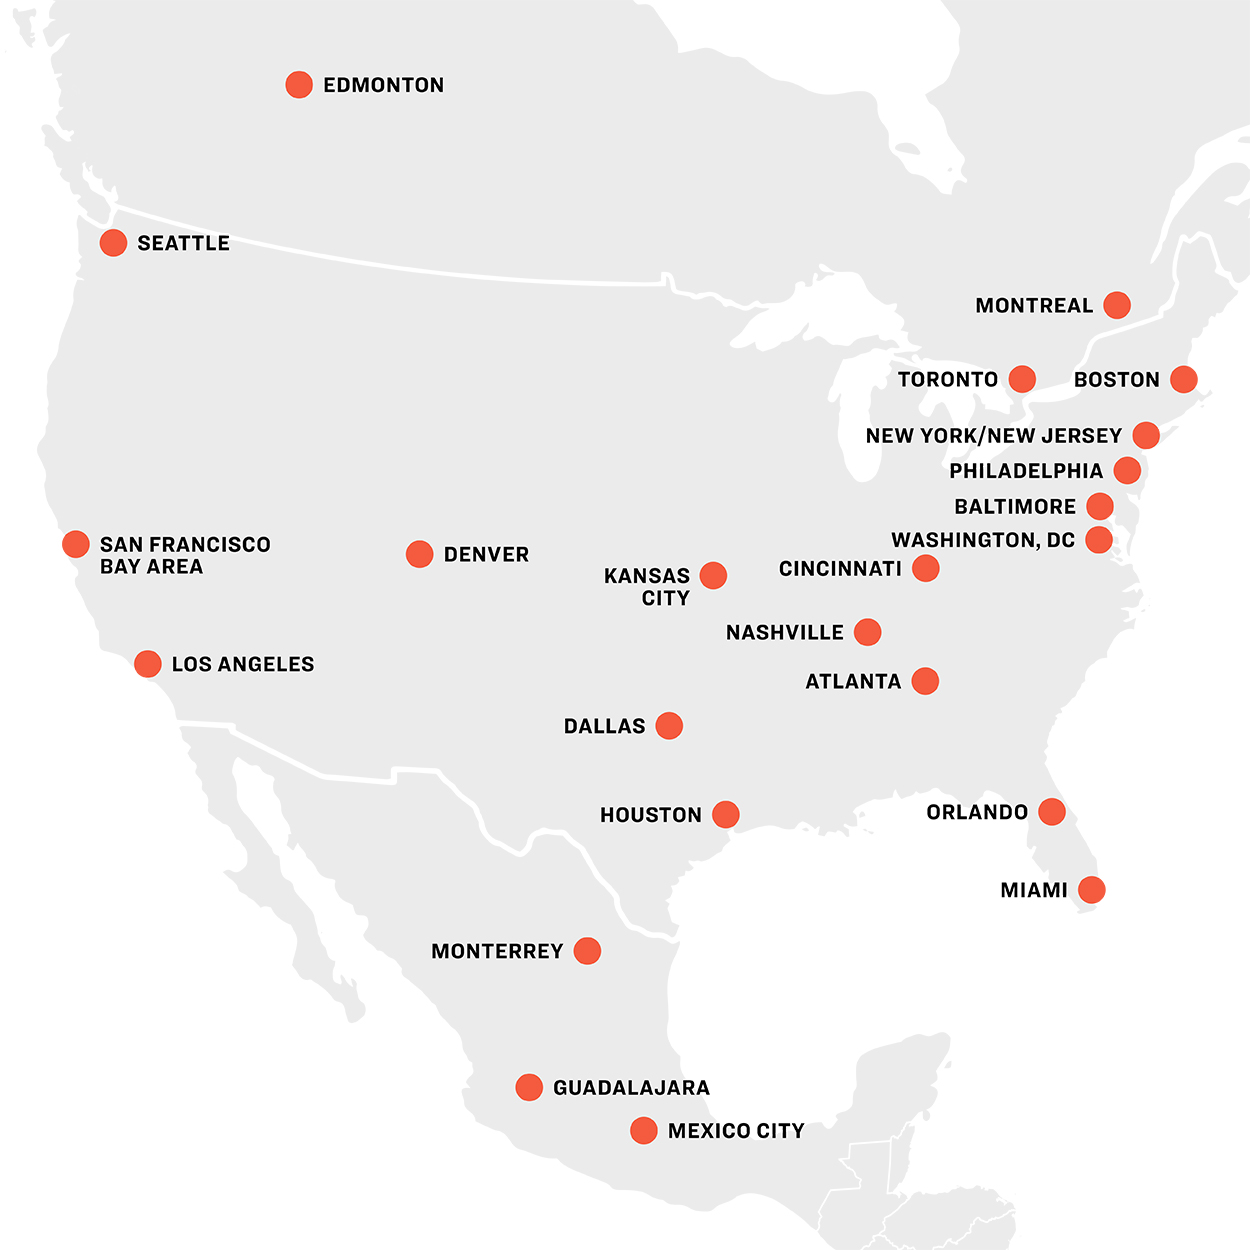 World Cup 2026 Cities Hosting